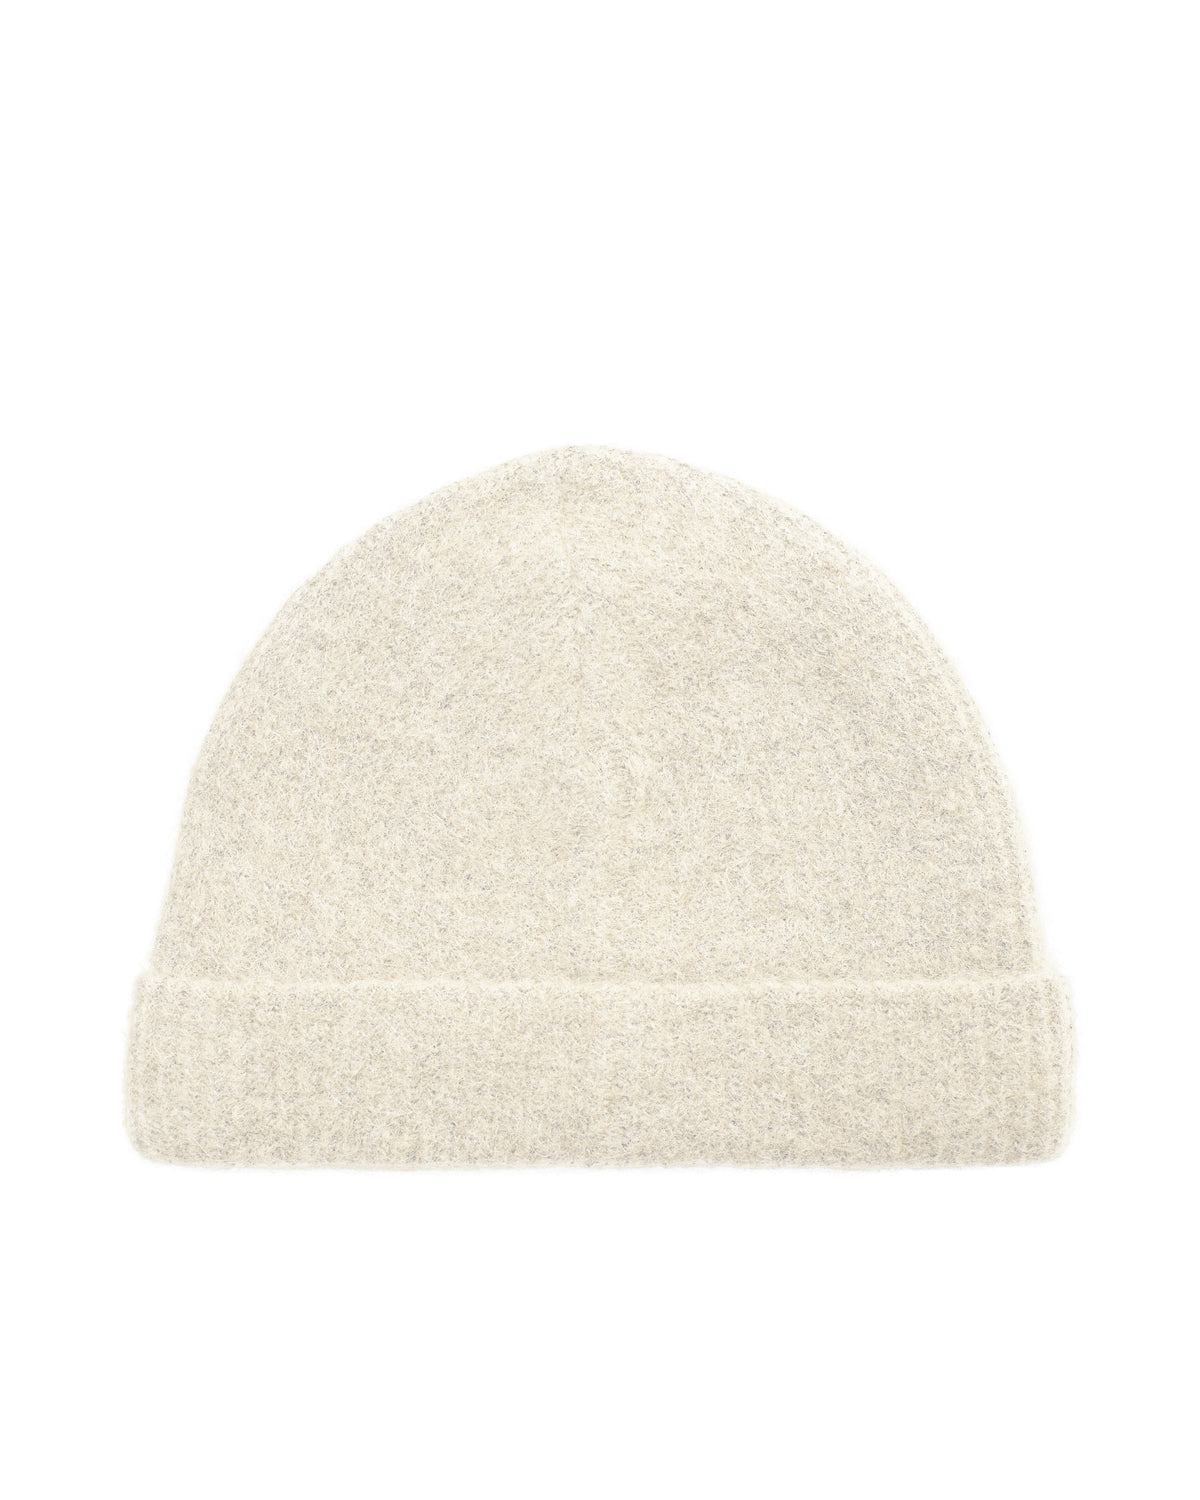 Cream ribbed woollen hat with turn up cuff